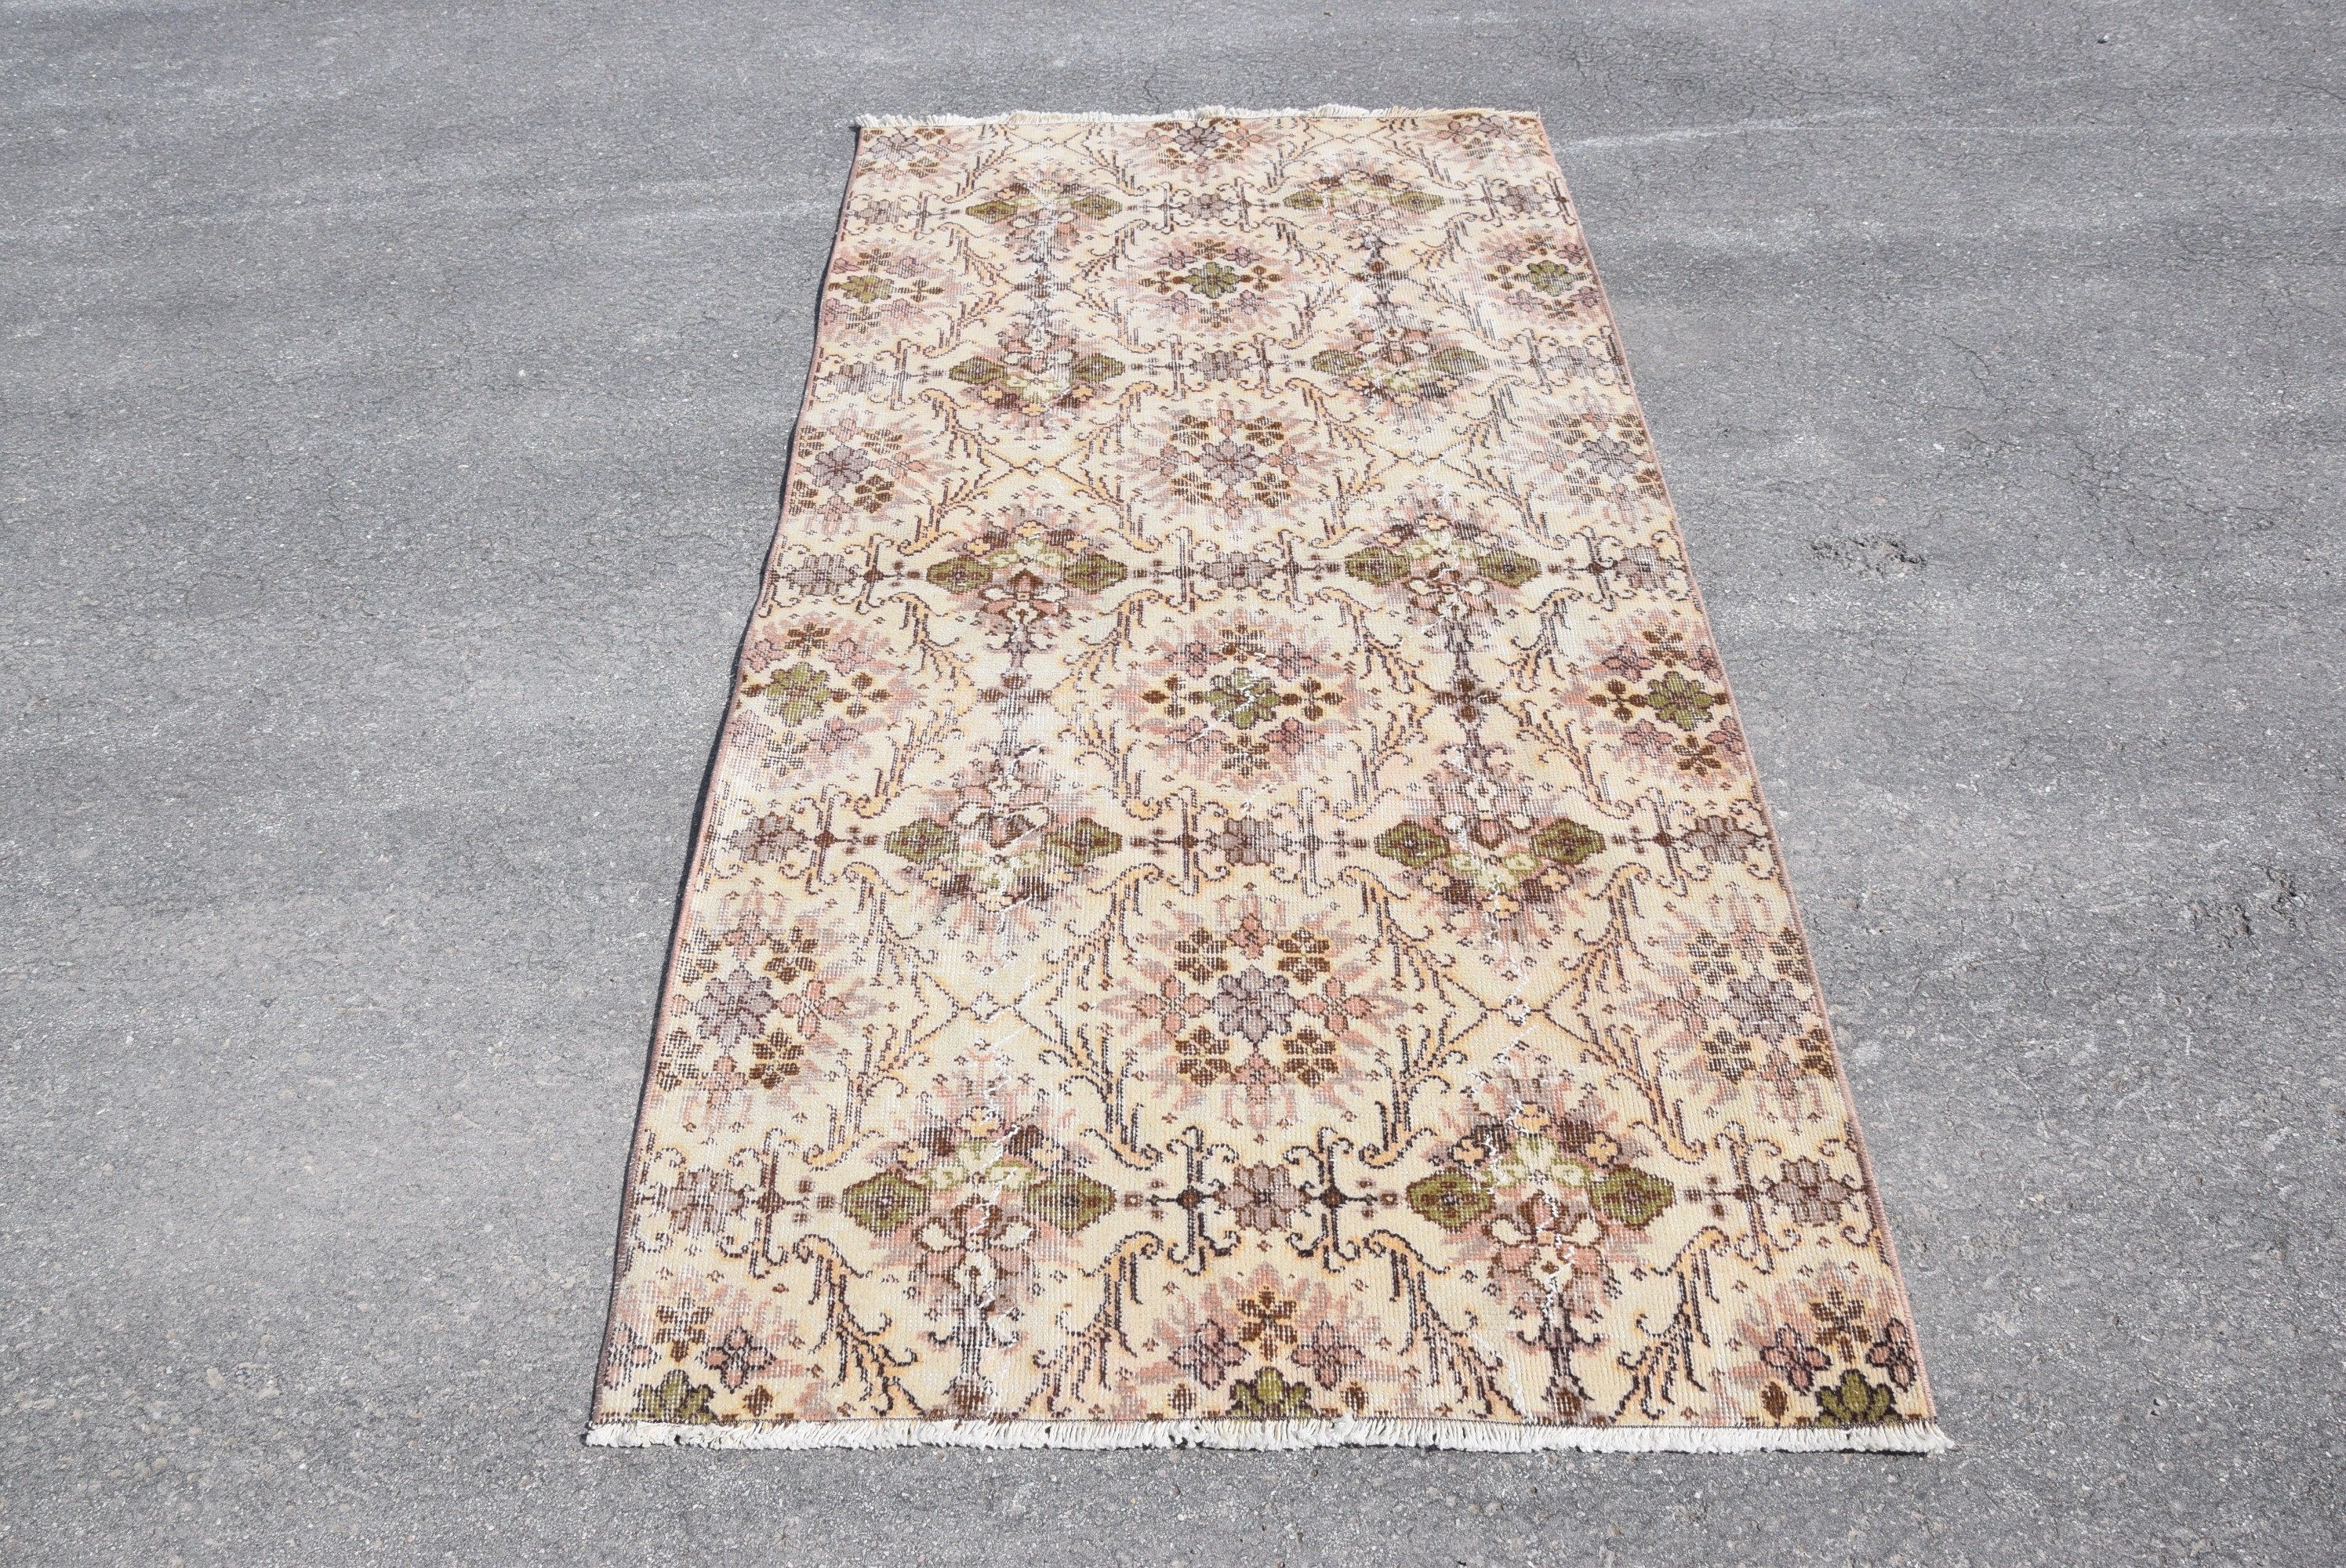 Outdoor Rugs, Vintage Rug, Yellow Kitchen Rug, Floor Rug, Entry Rugs, 3.4x6.6 ft Accent Rug, Oushak Rugs, Turkish Rugs, Rugs for Kitchen